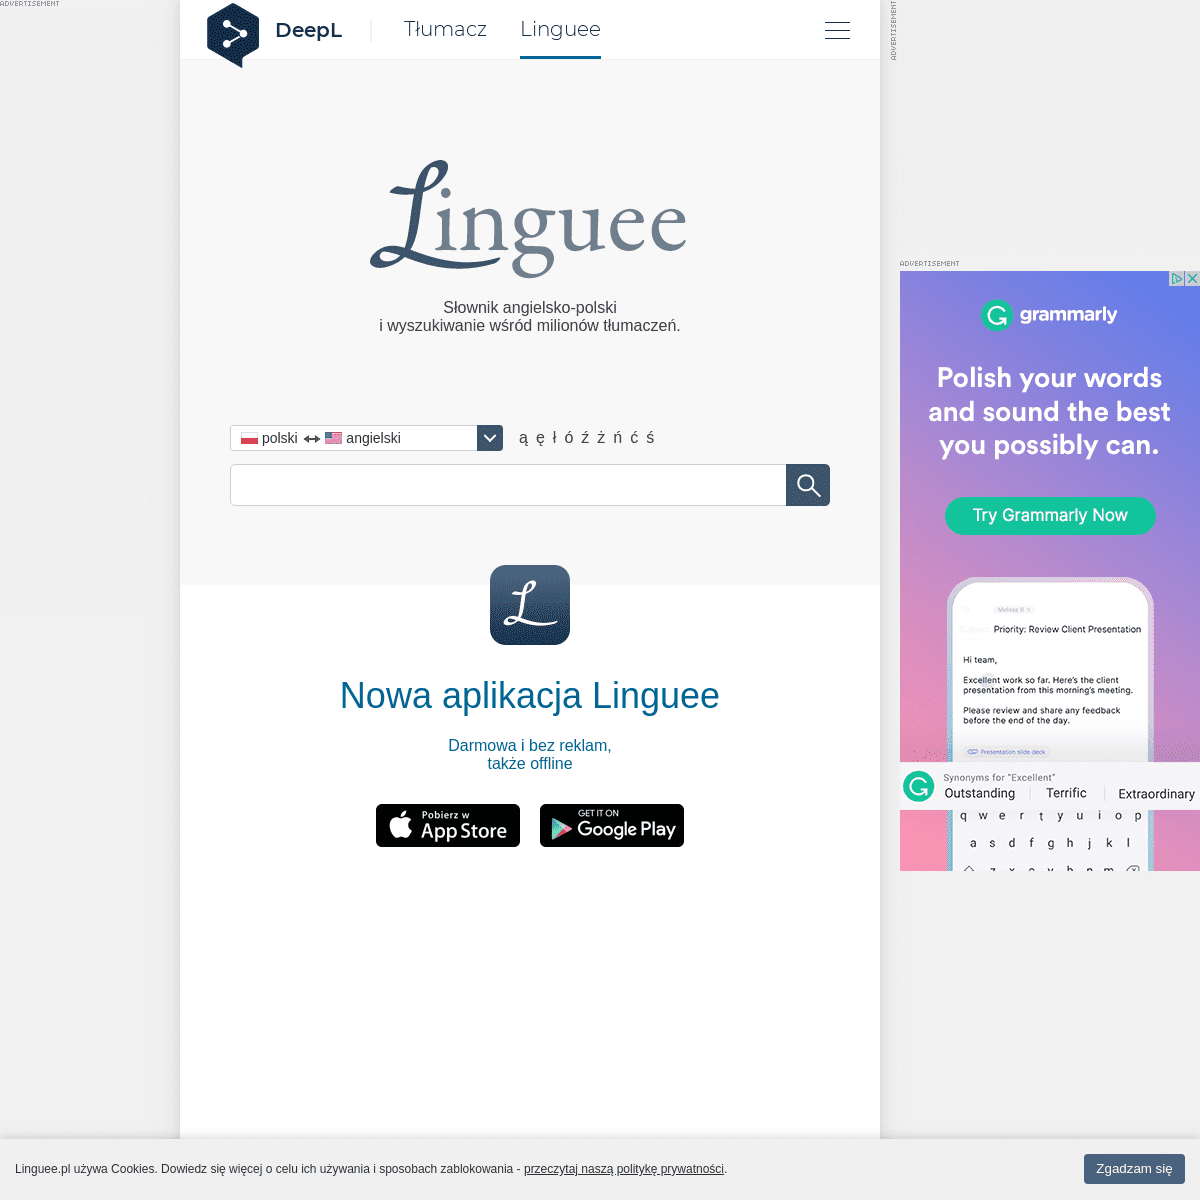 A complete backup of linguee.pl